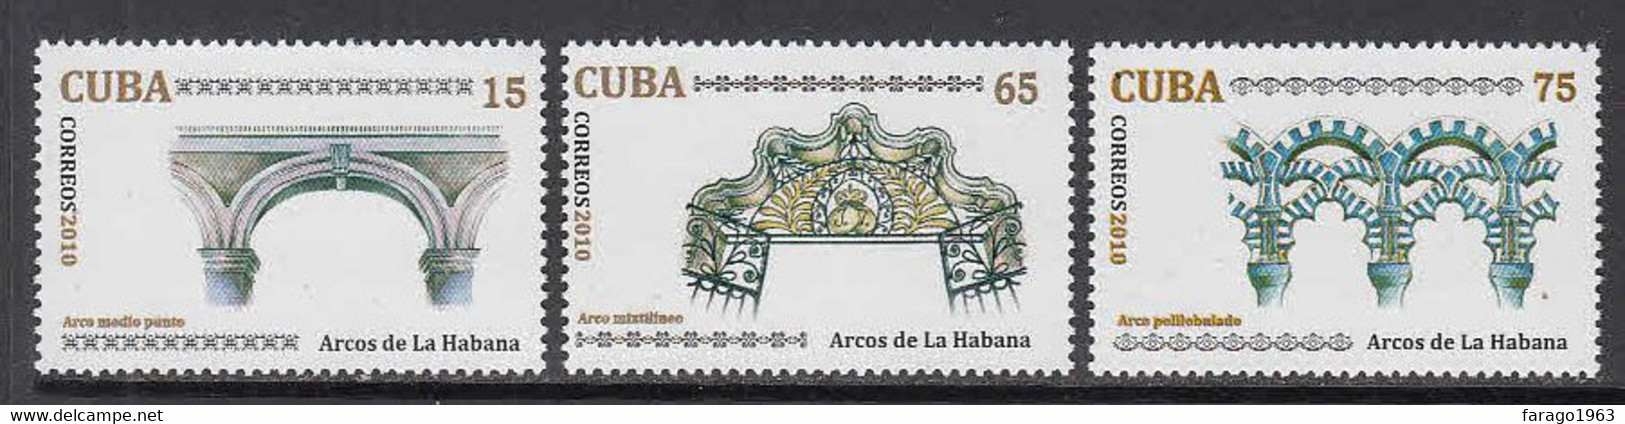 2010 Cuba Arches Arcos Architecture Complete Set Of 3 MNH - Unused Stamps